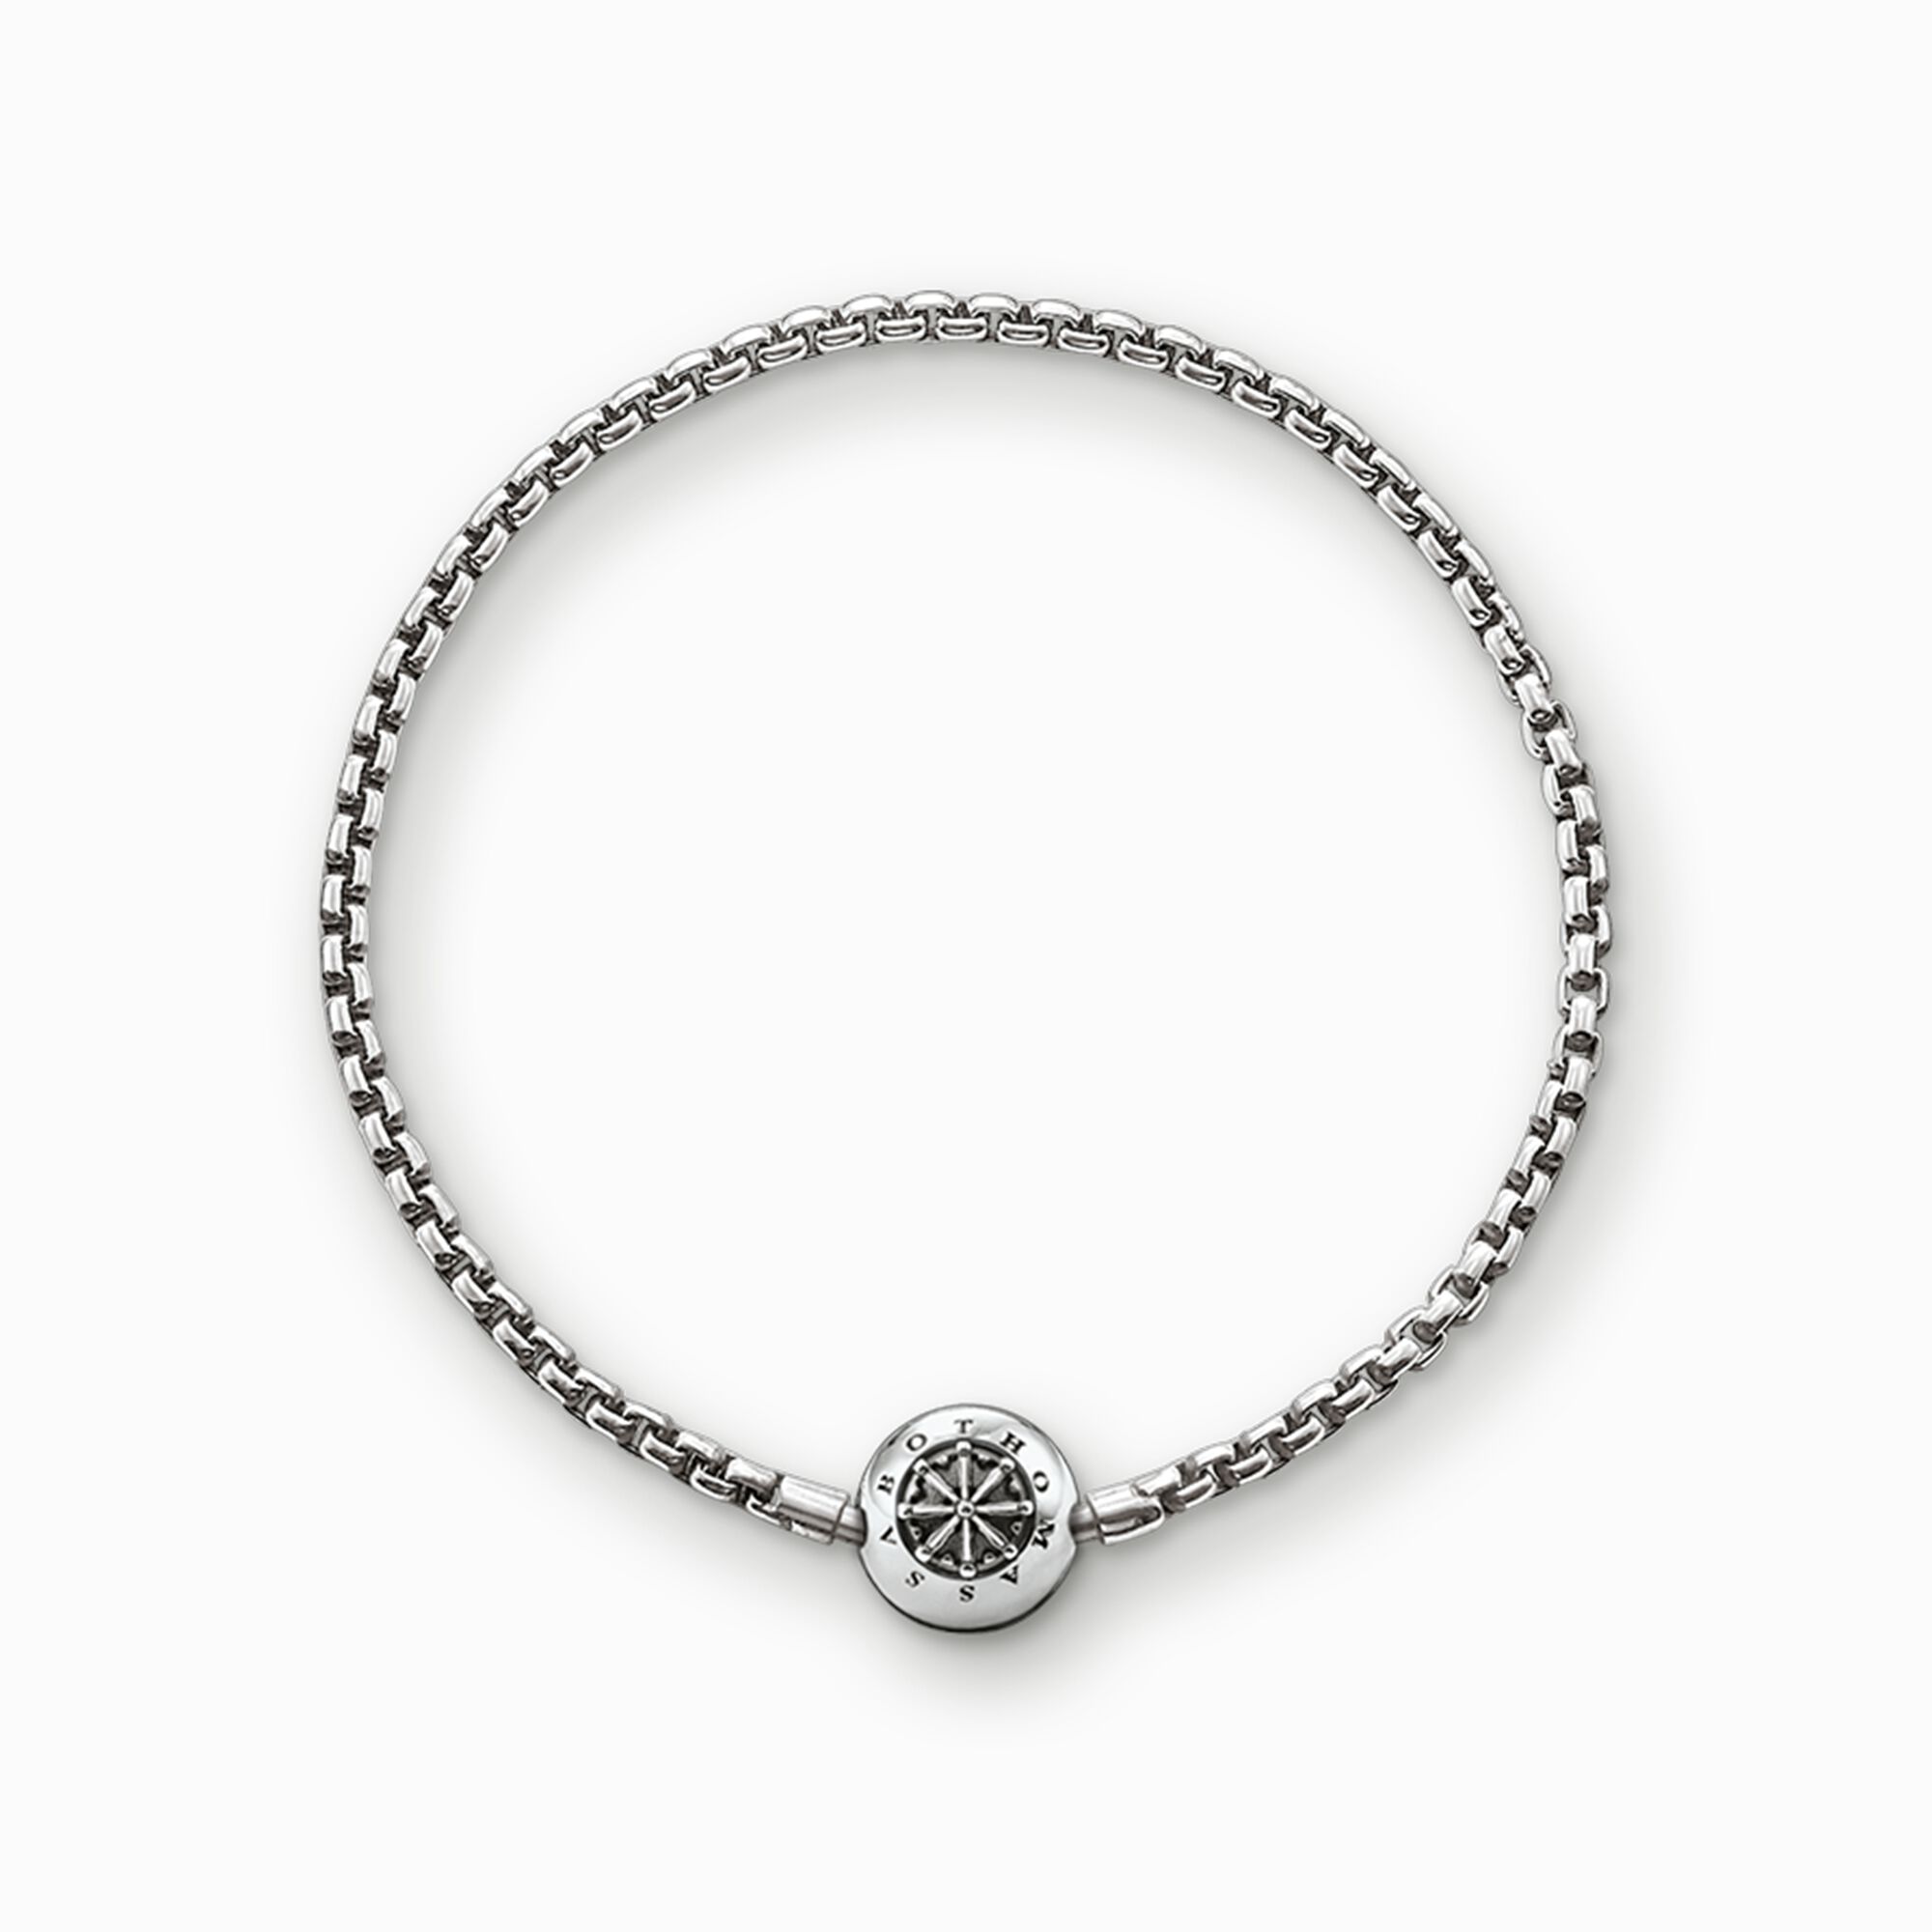 Bracelet for Beads blackened from the Karma Beads collection in the THOMAS SABO online store